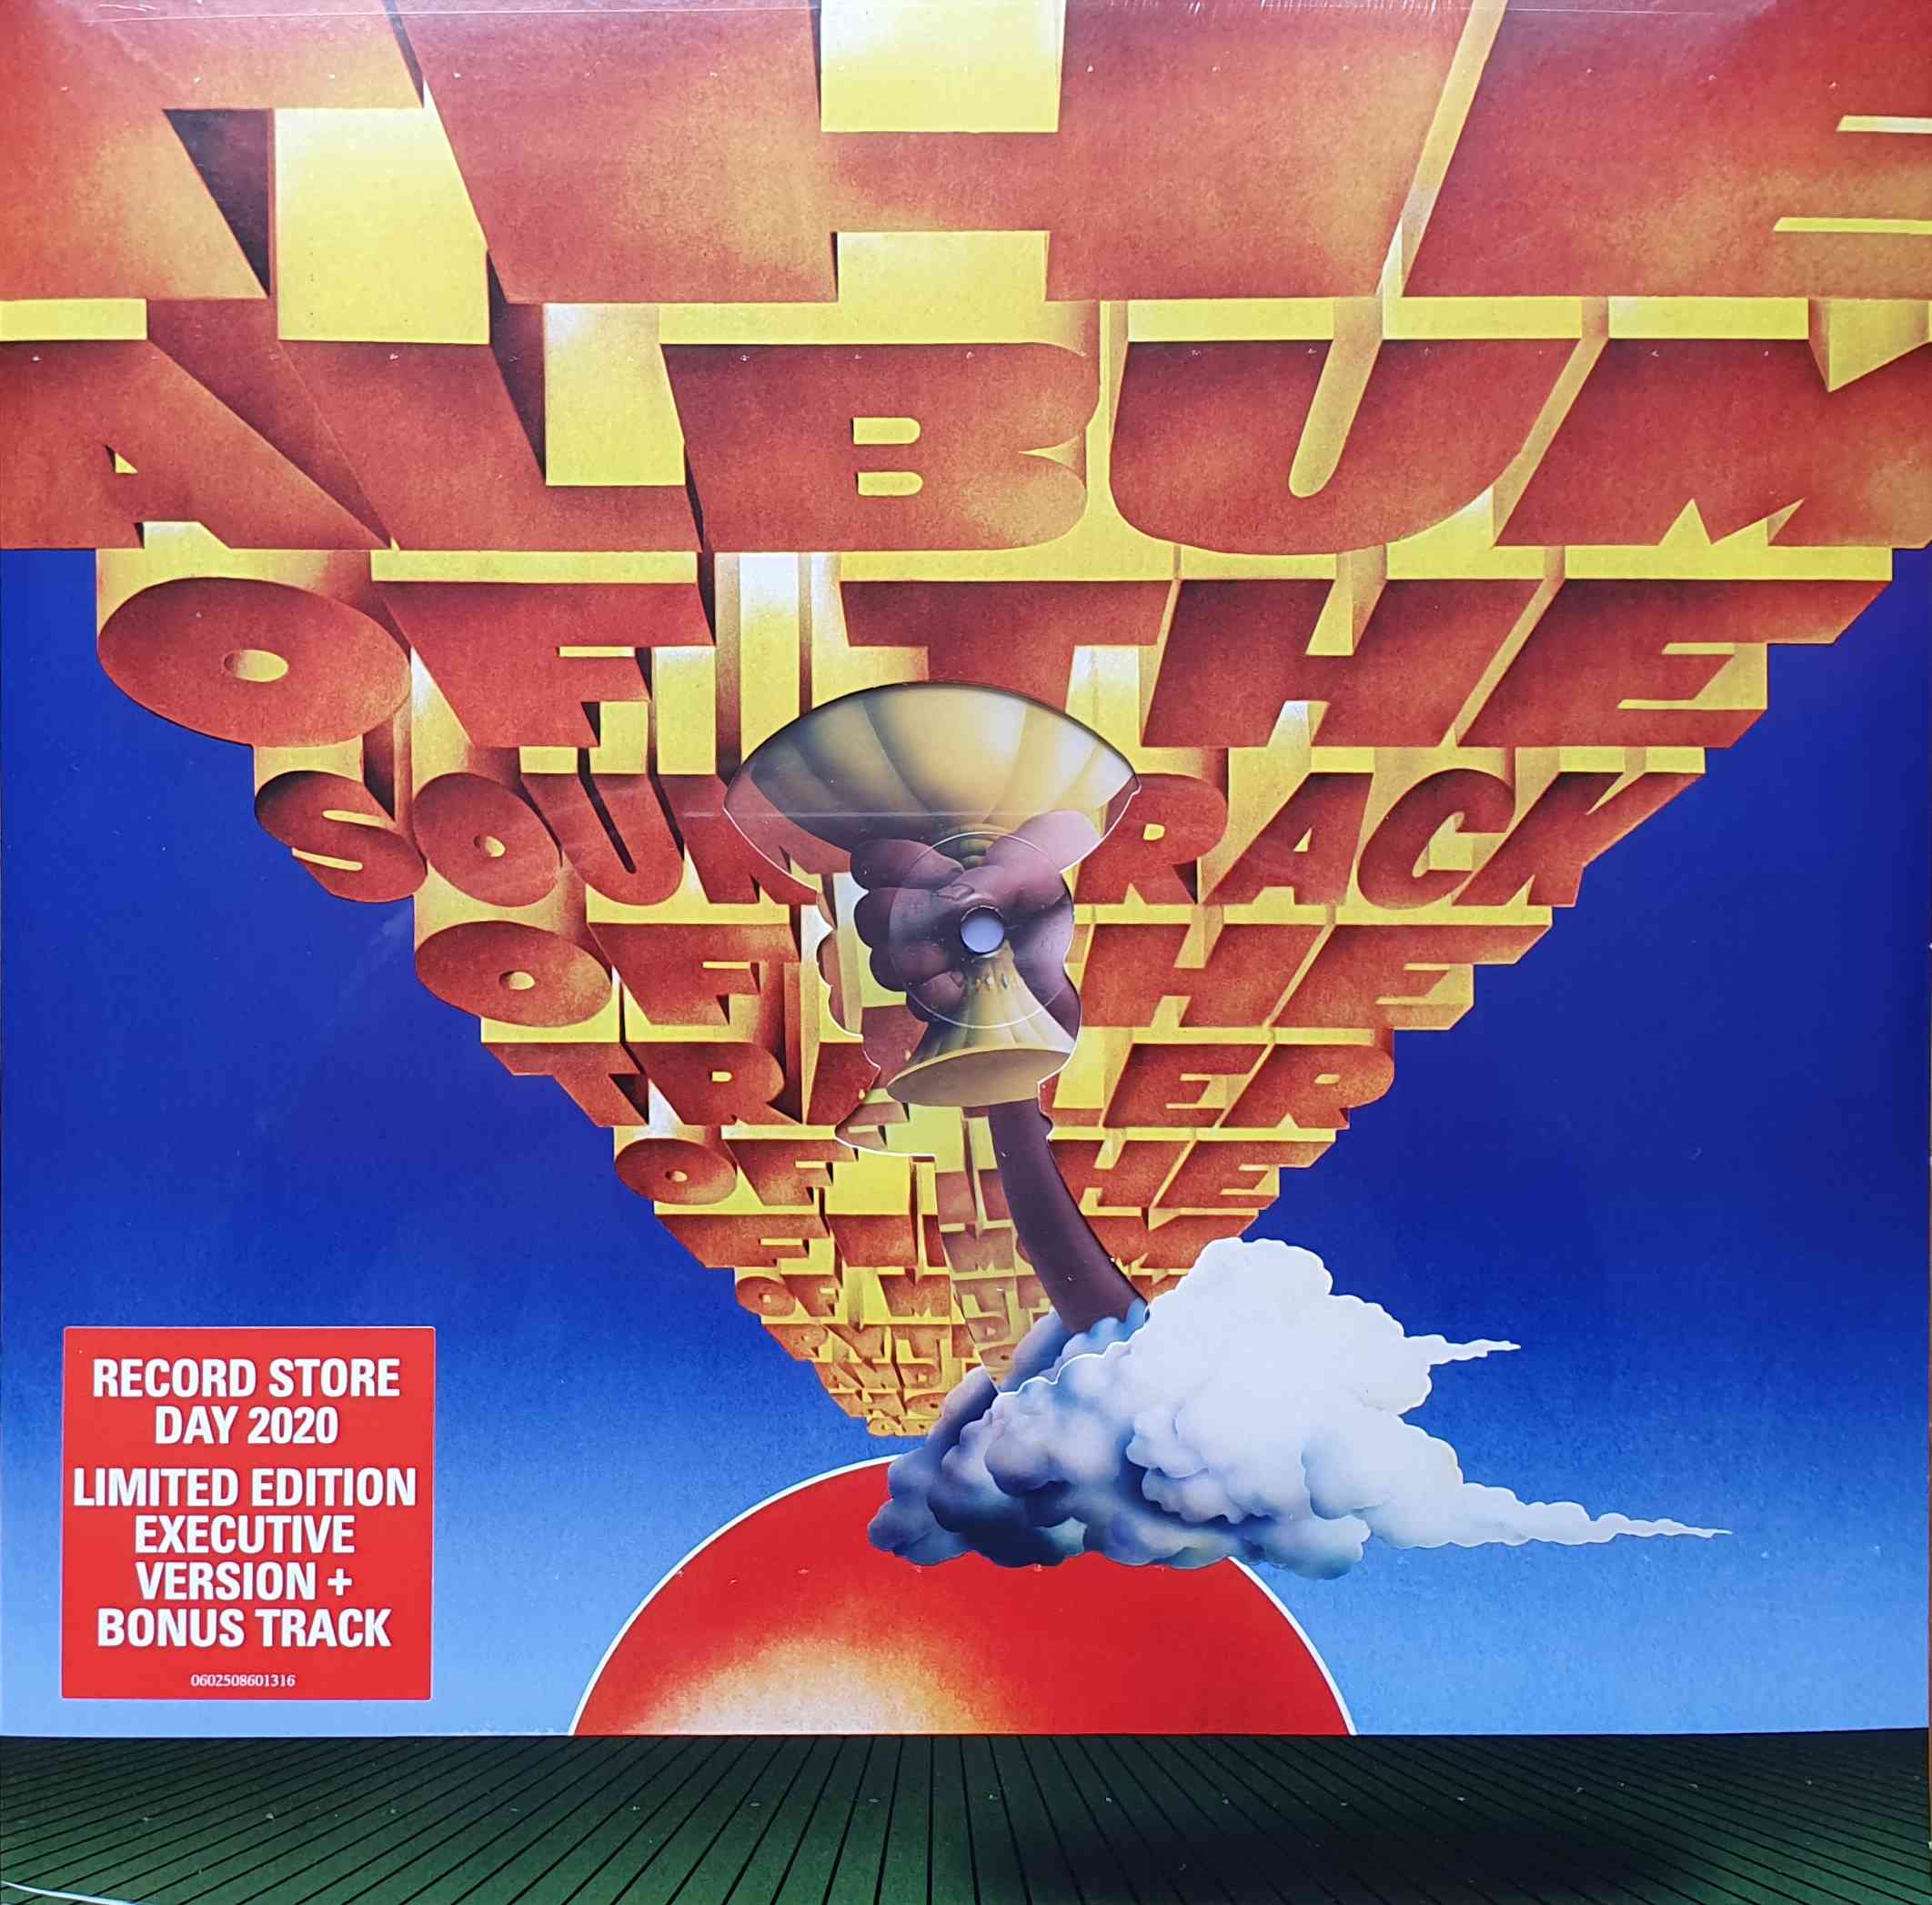 Picture of 0602508601316 The Holy Grail (Limited edition vinyl RSD2020) by artist Monty Python from the BBC albums - Records and Tapes library